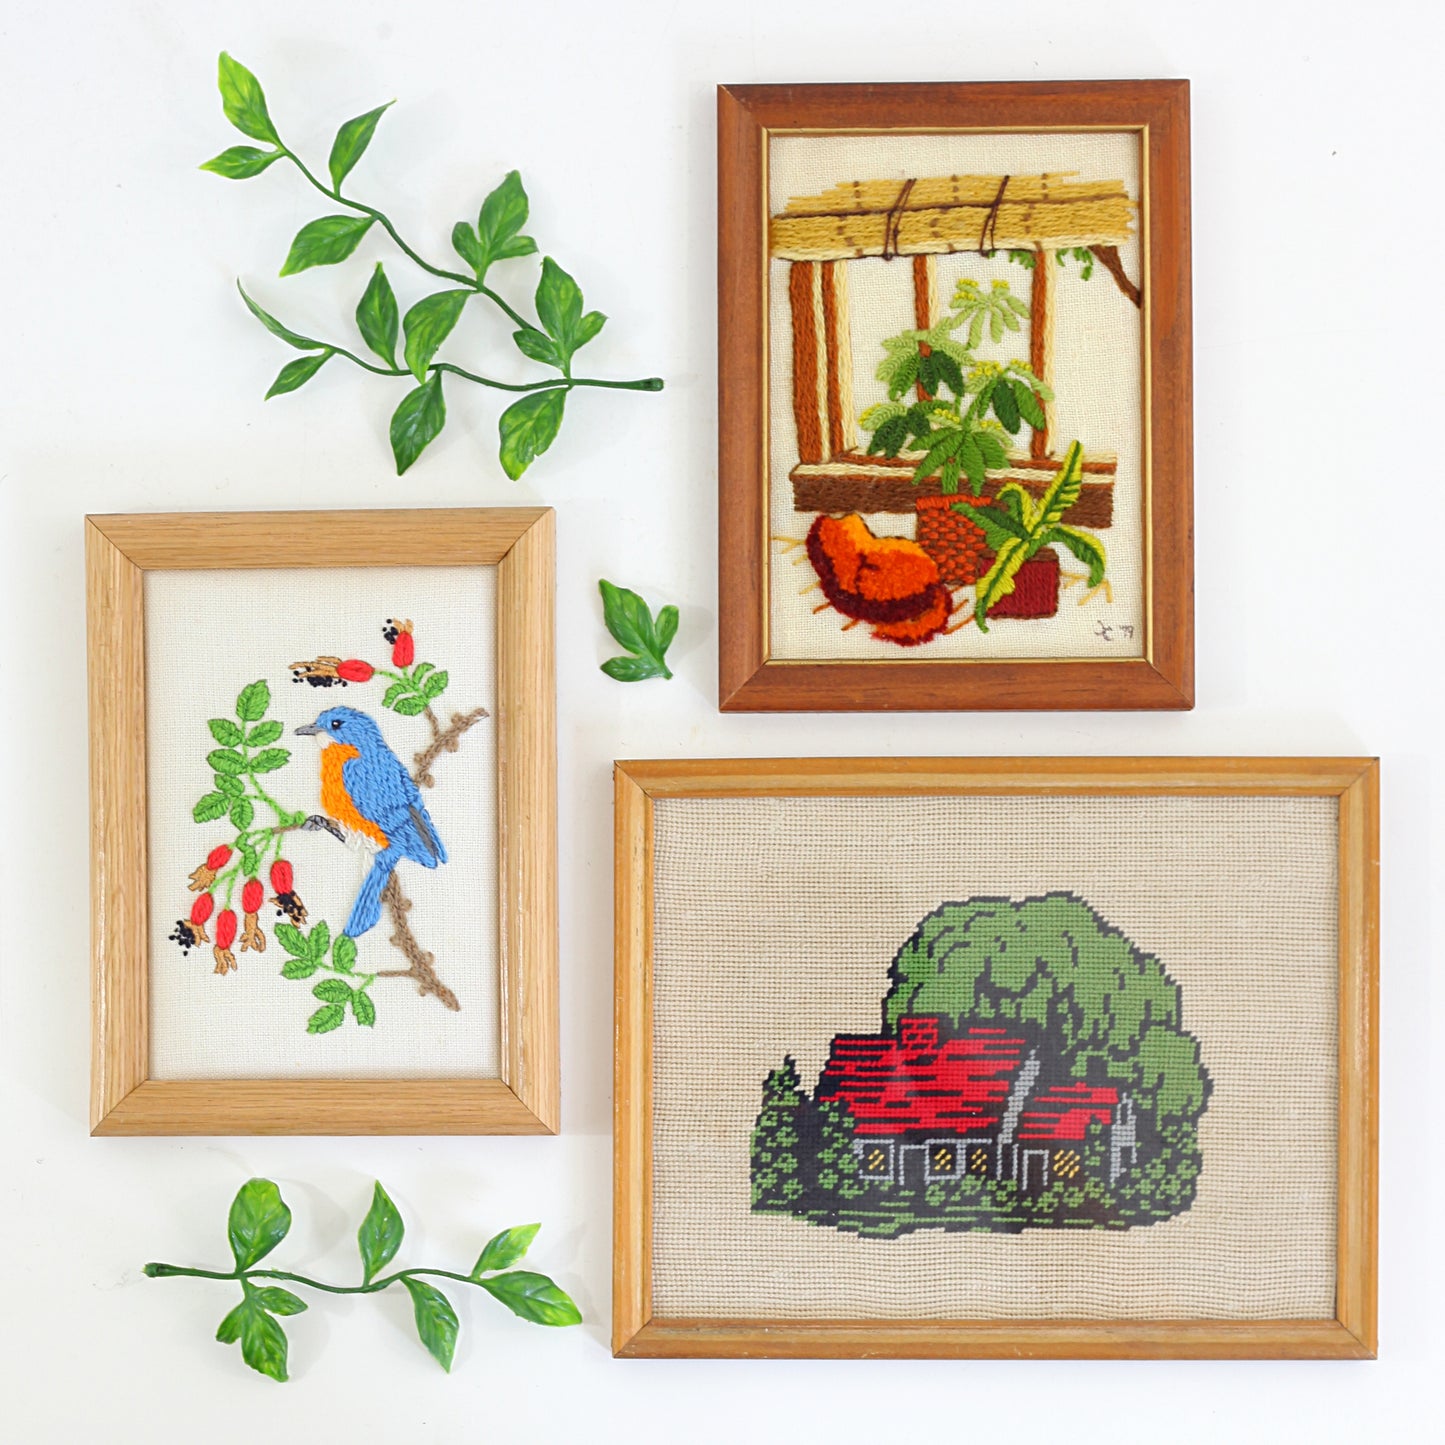 SOLD - Vintage Plants & A Cat Crewel Embroidery